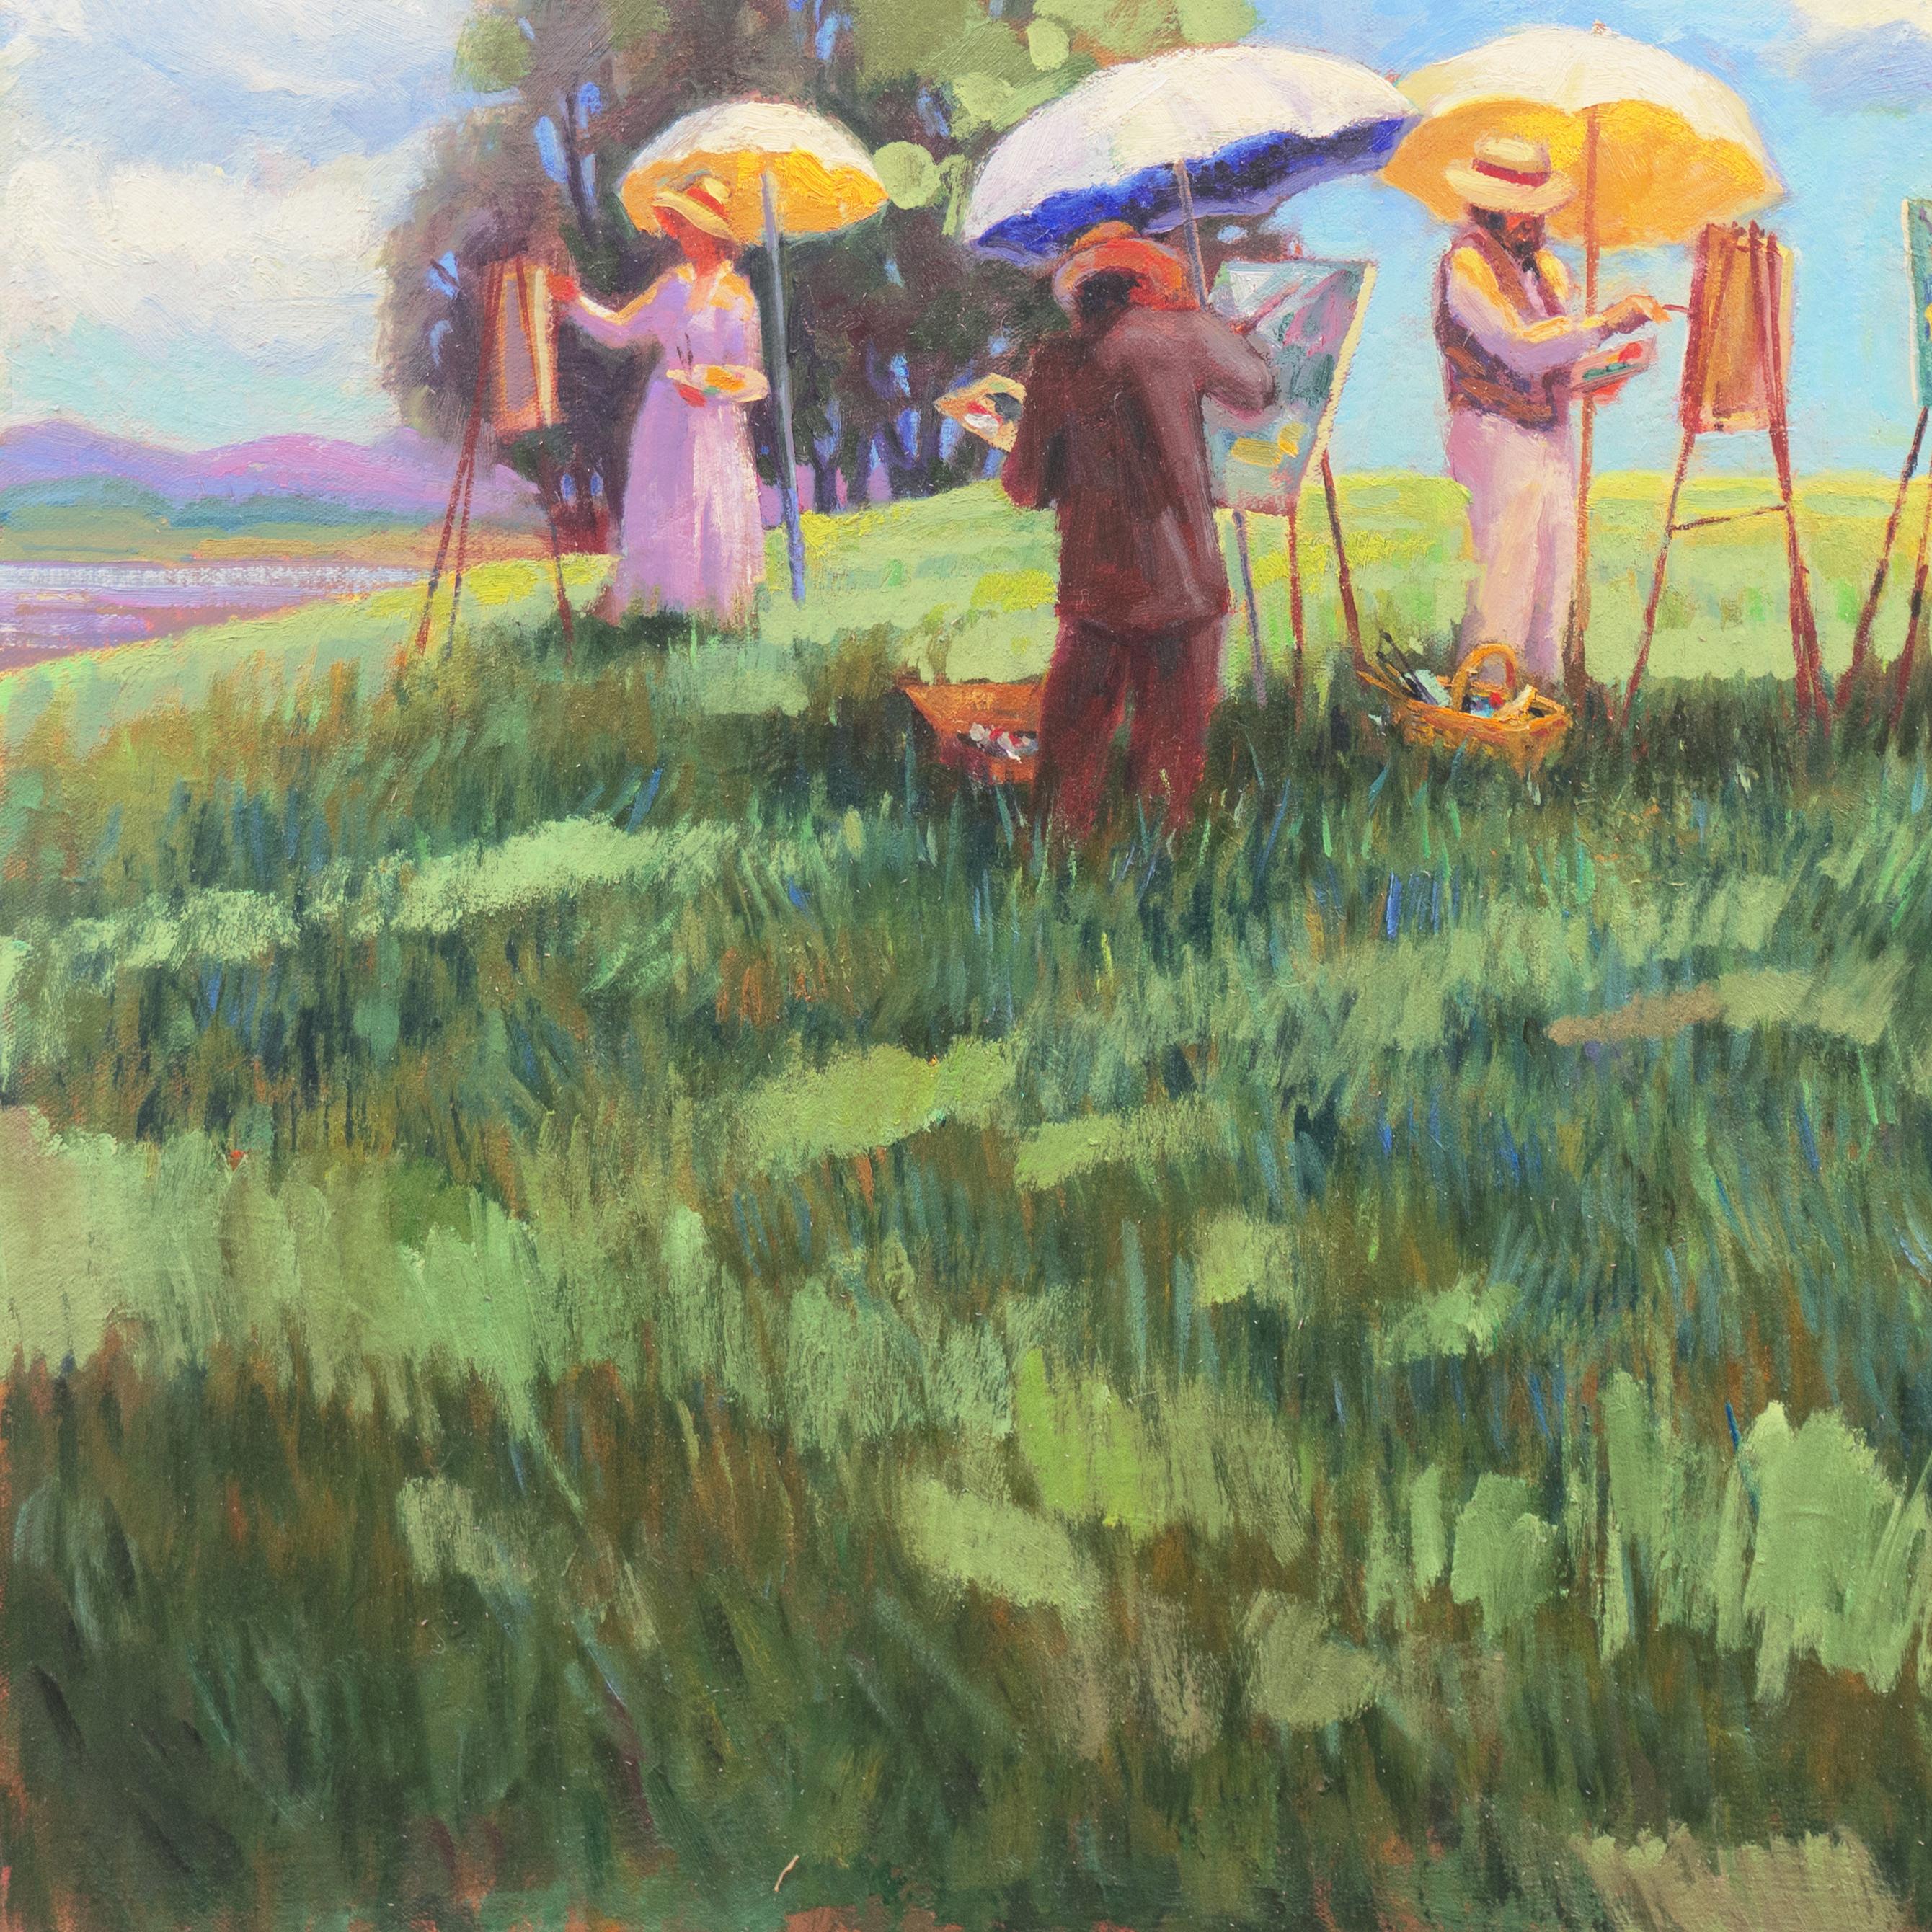 'Edwardian Plein-Air Painters', Summer Landscape with Artists Working - Impressionist Painting by Mel Kane